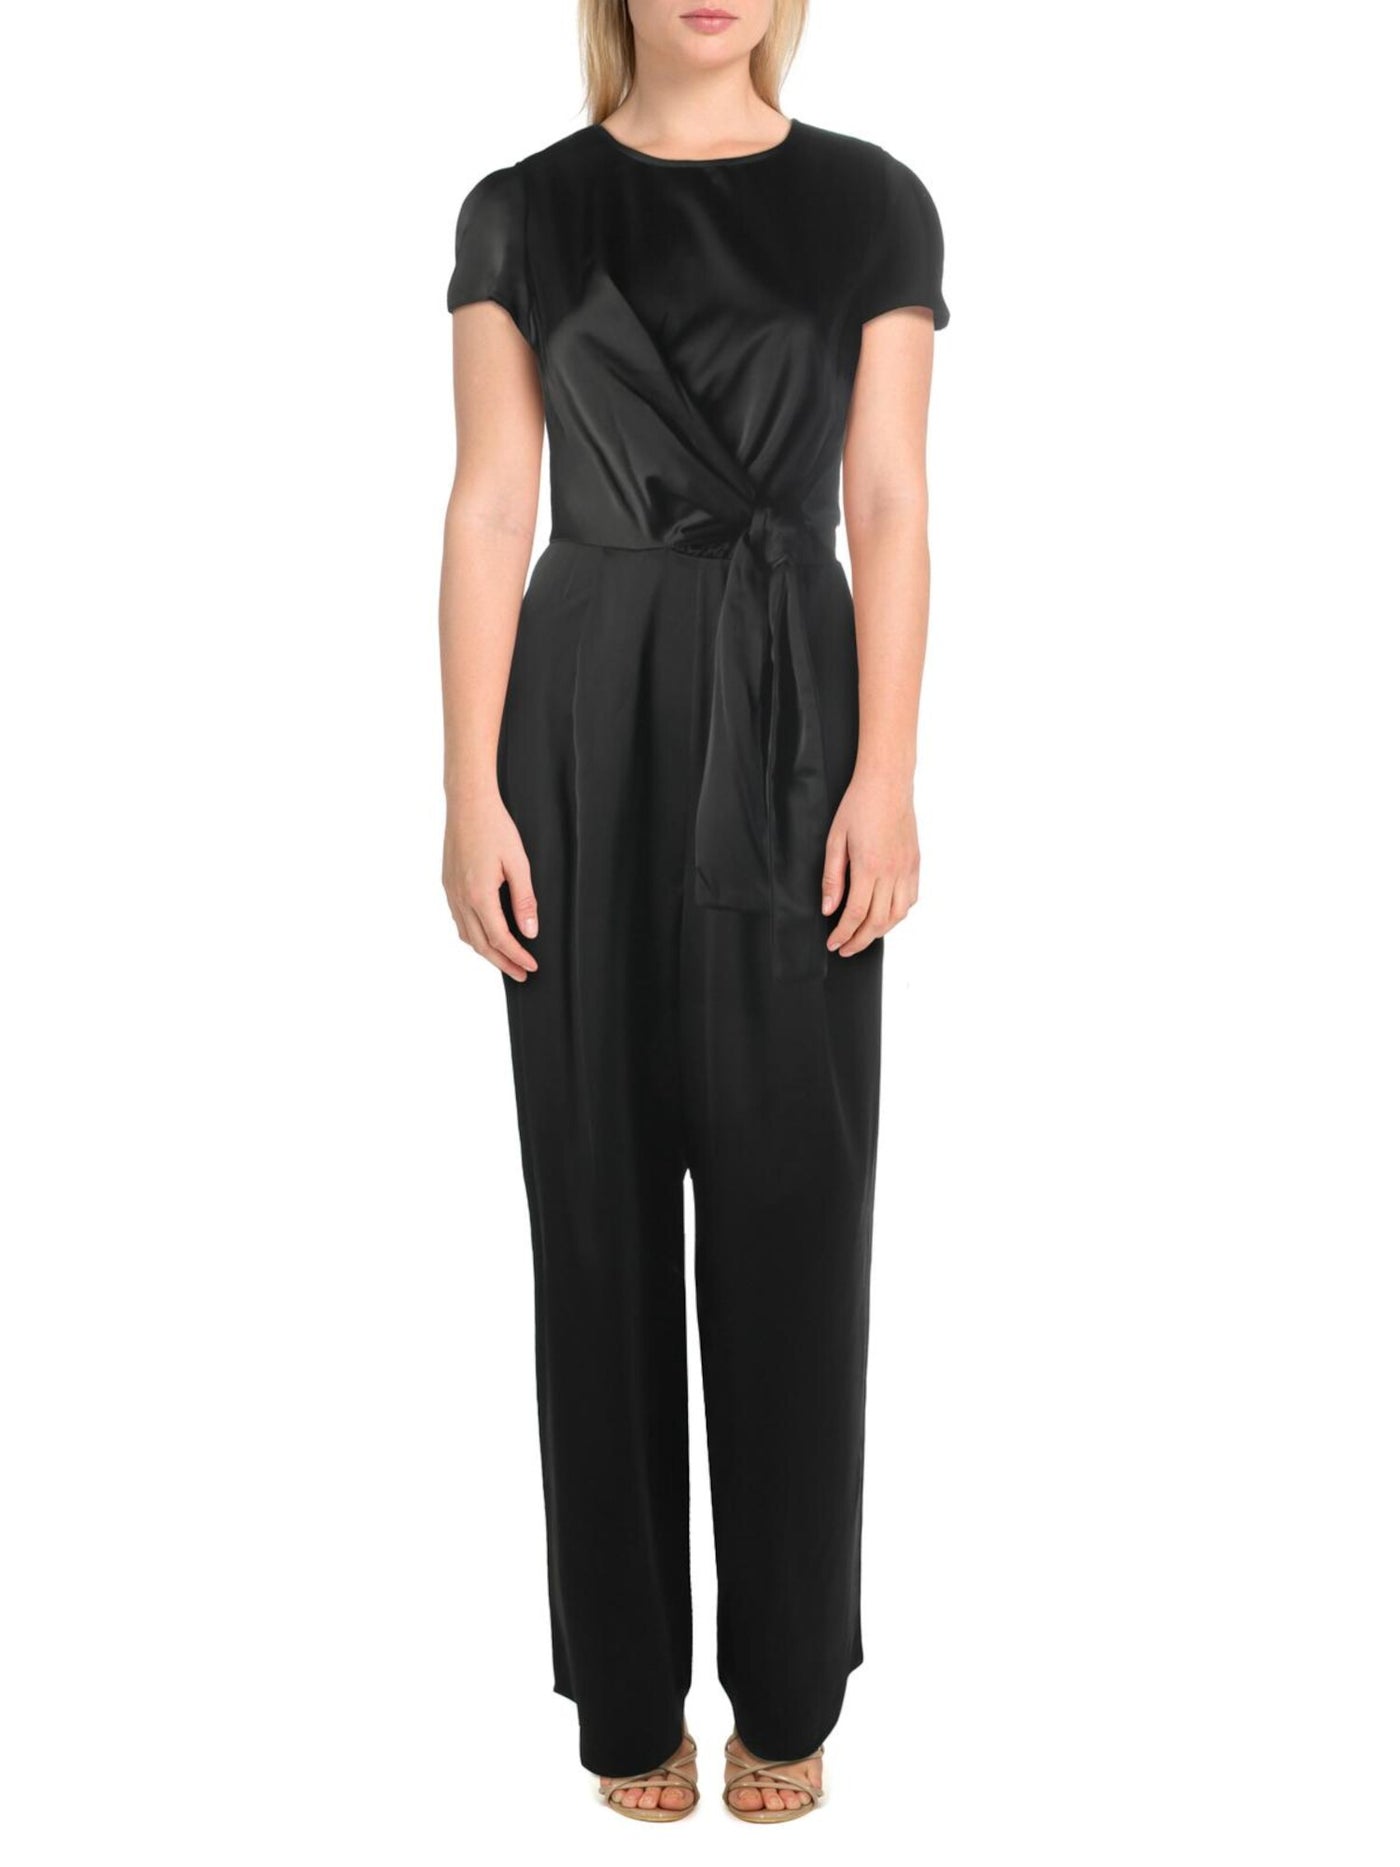 LISA  + LUCY Womens Black Ruched Tie Satin Short Sleeve Crew Neck Wear To Work Straight leg Jumpsuit S